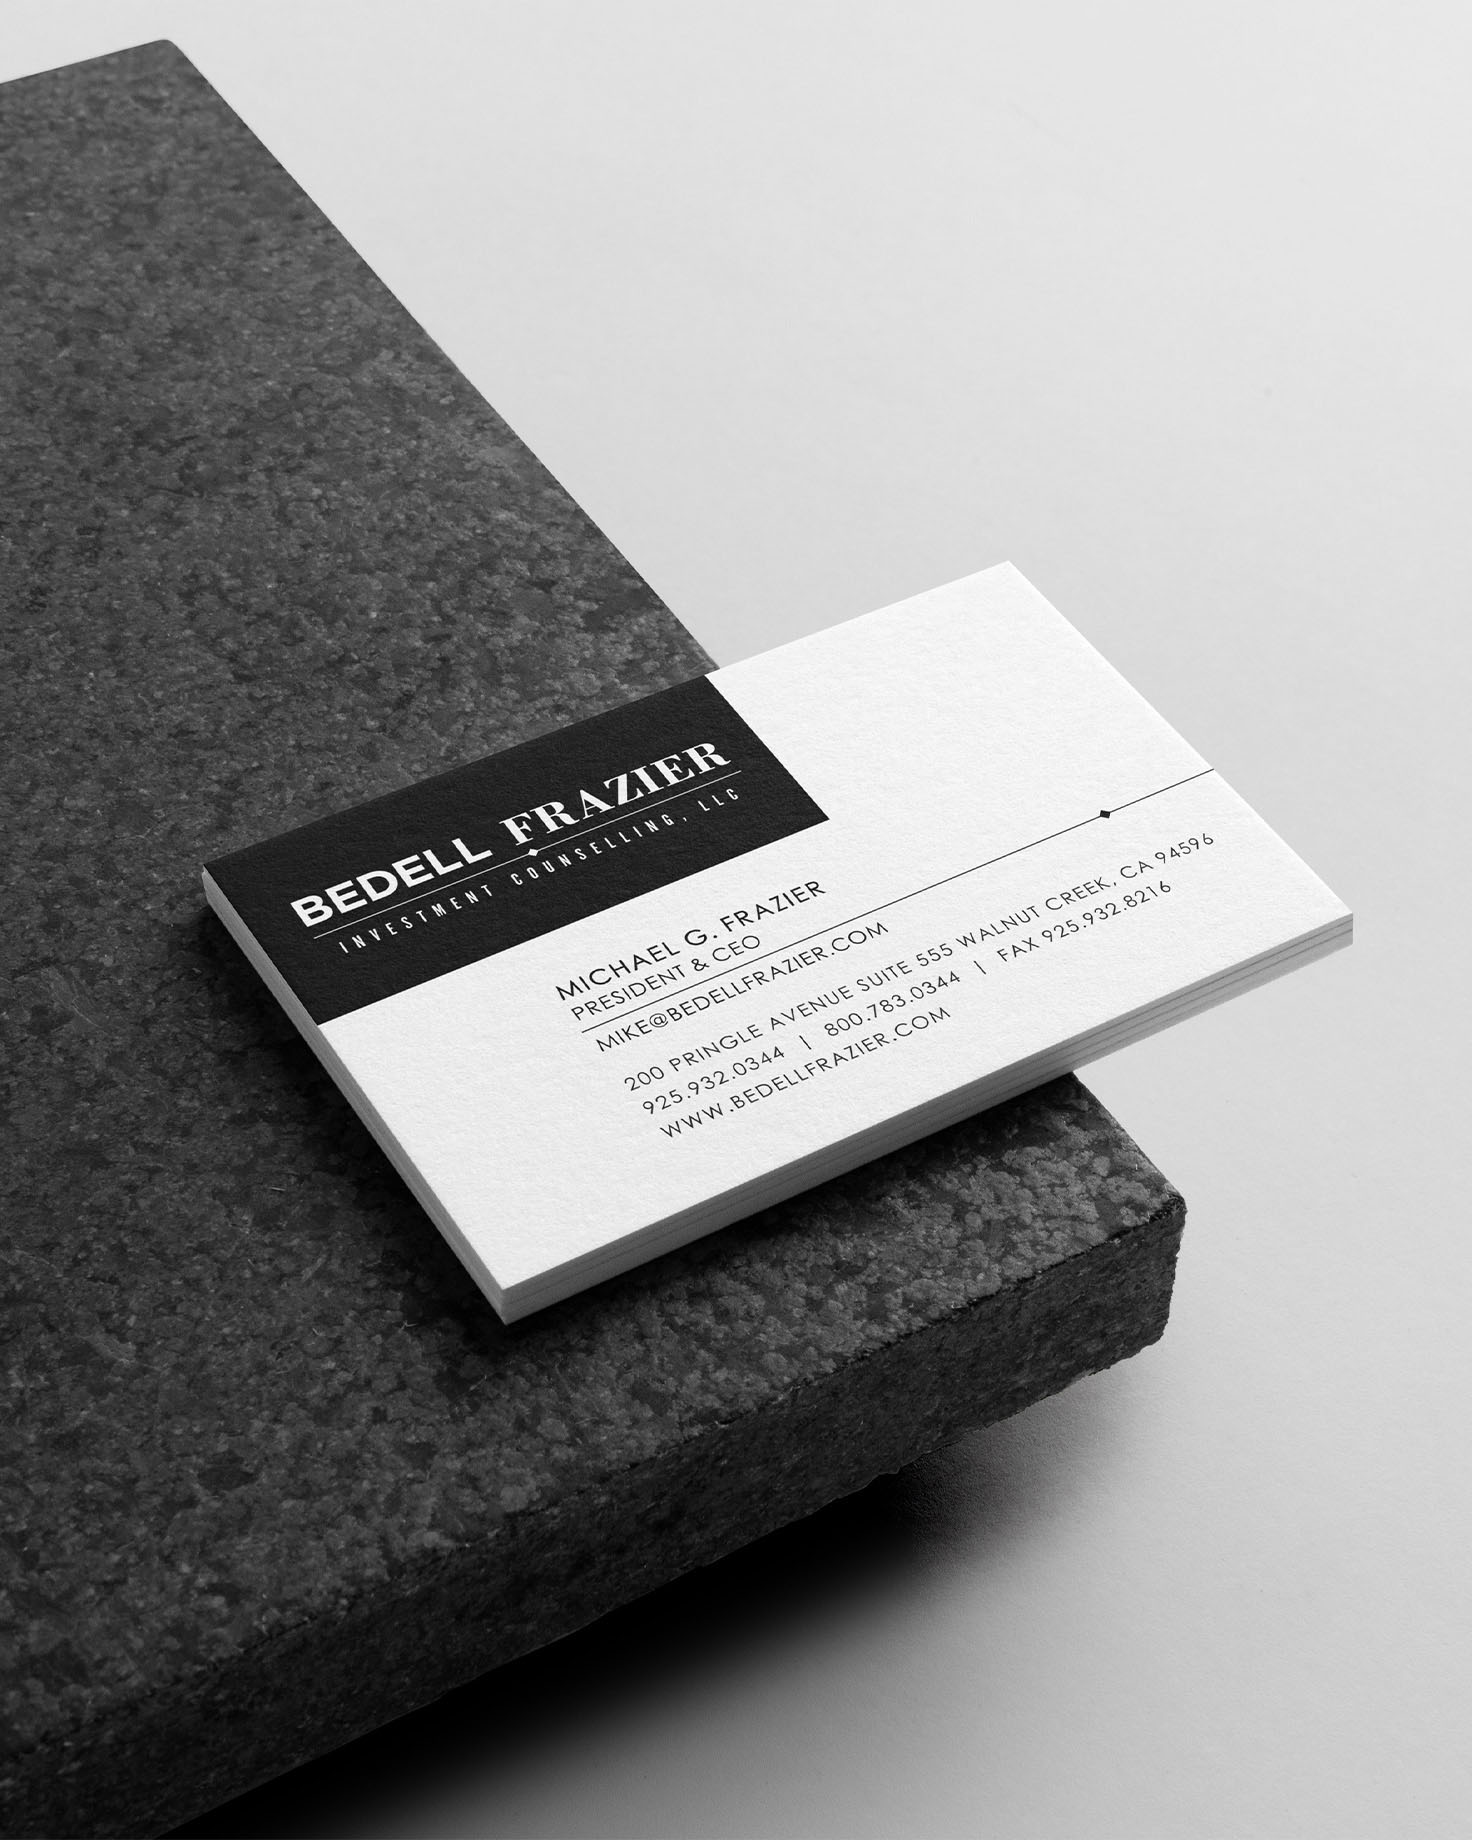 Business Card Design mockup for Bedell Frazier Investment Counselling - Whiskey and Red Small Business Branding and Website Design Packages